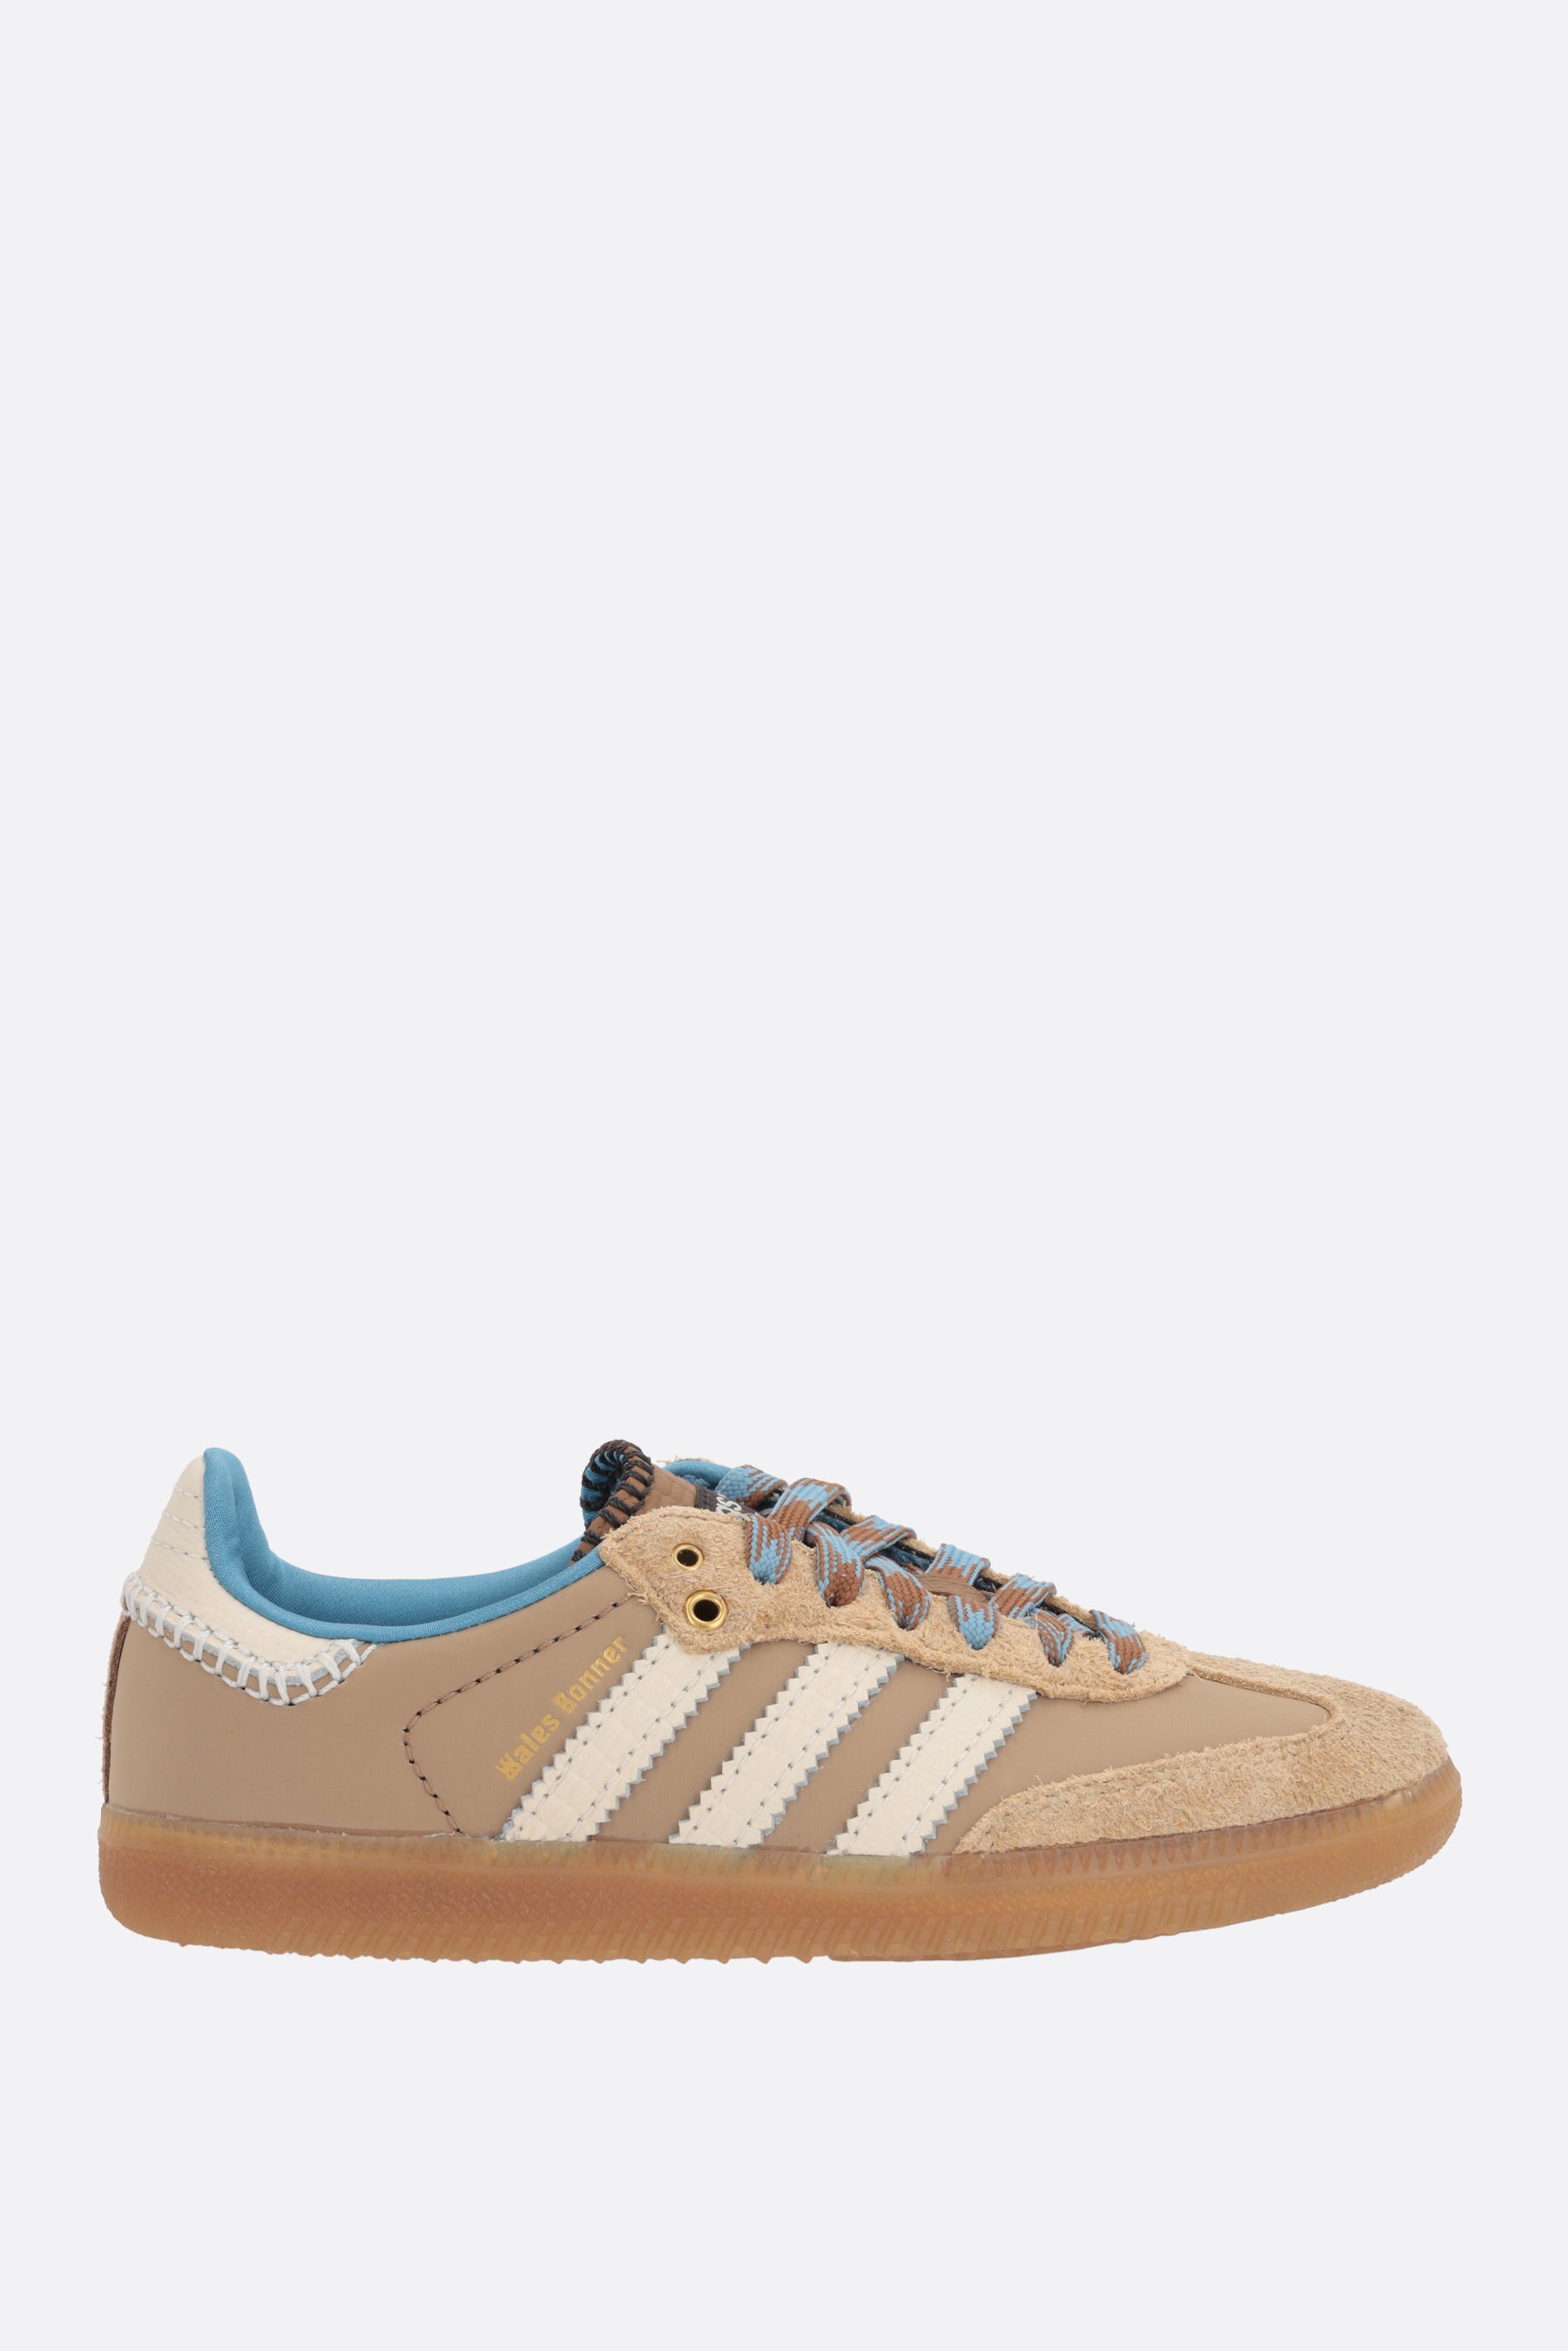 WB Samba nylon and suede sneakers